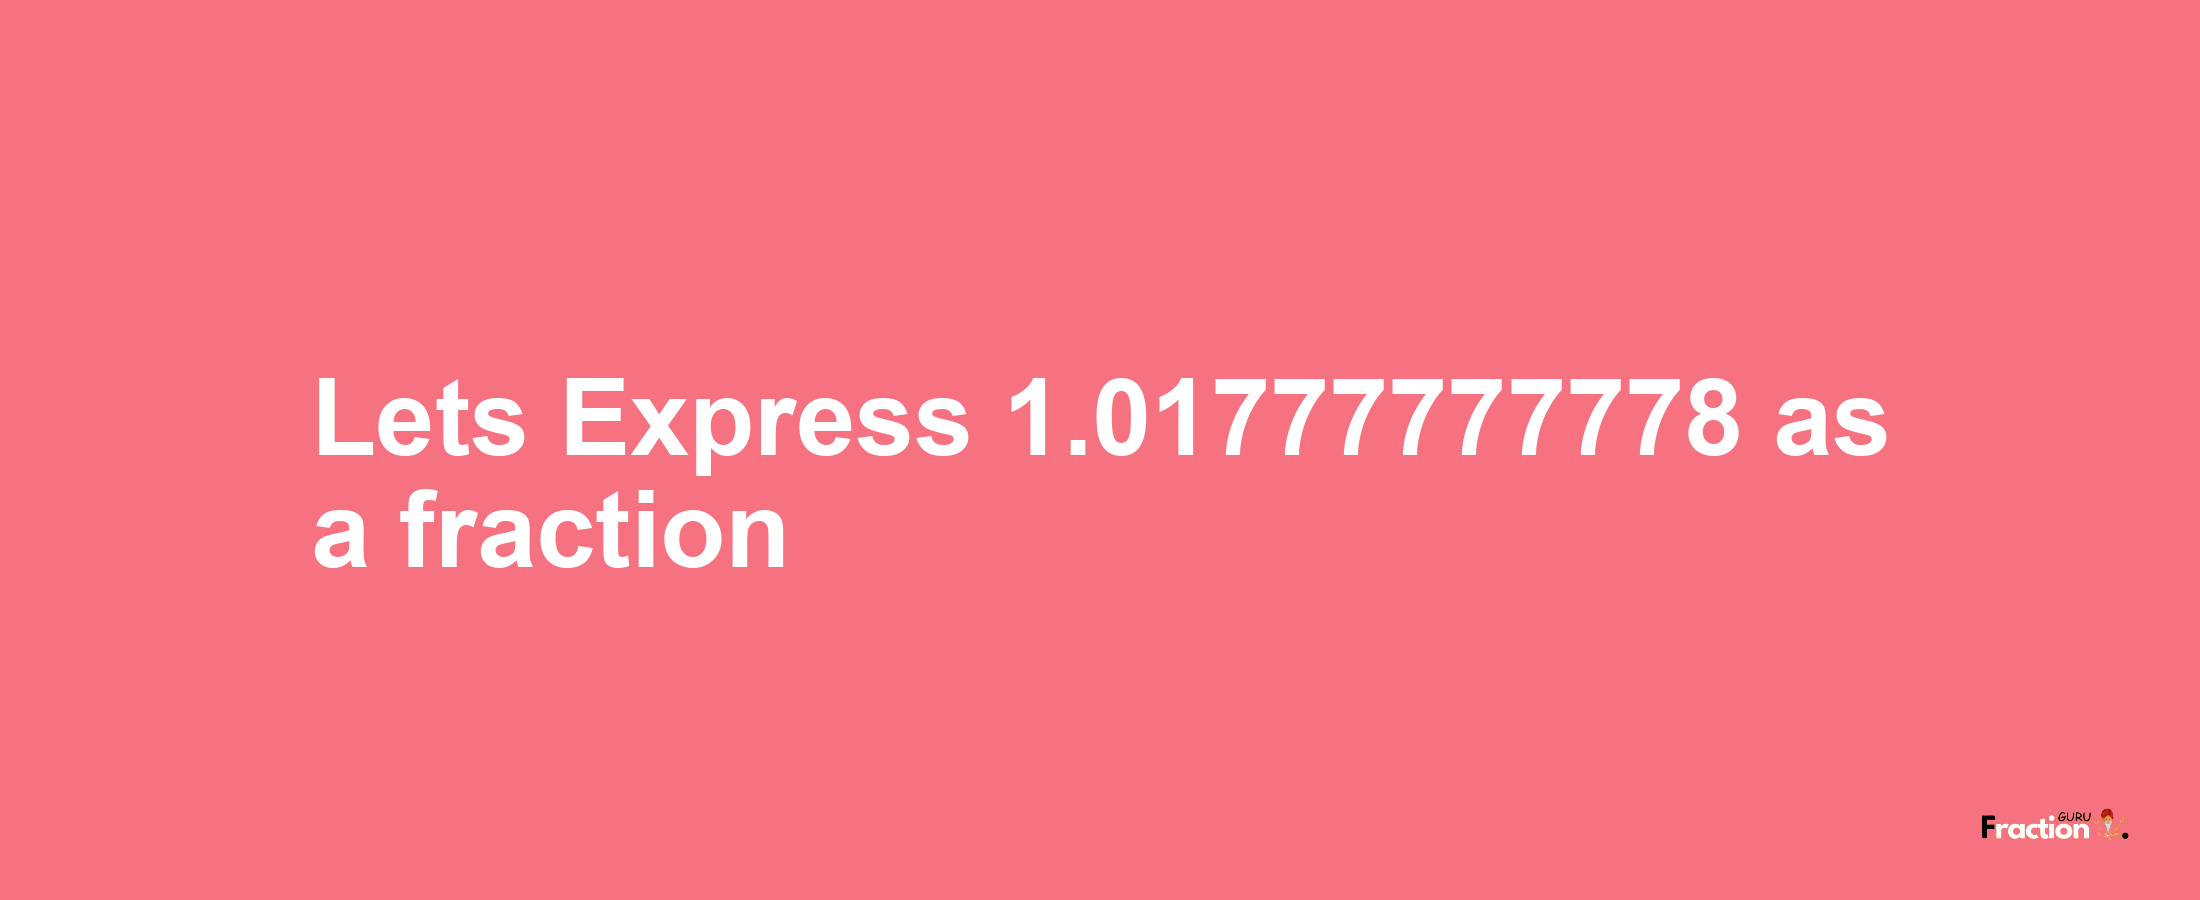 Lets Express 1.01777777778 as afraction